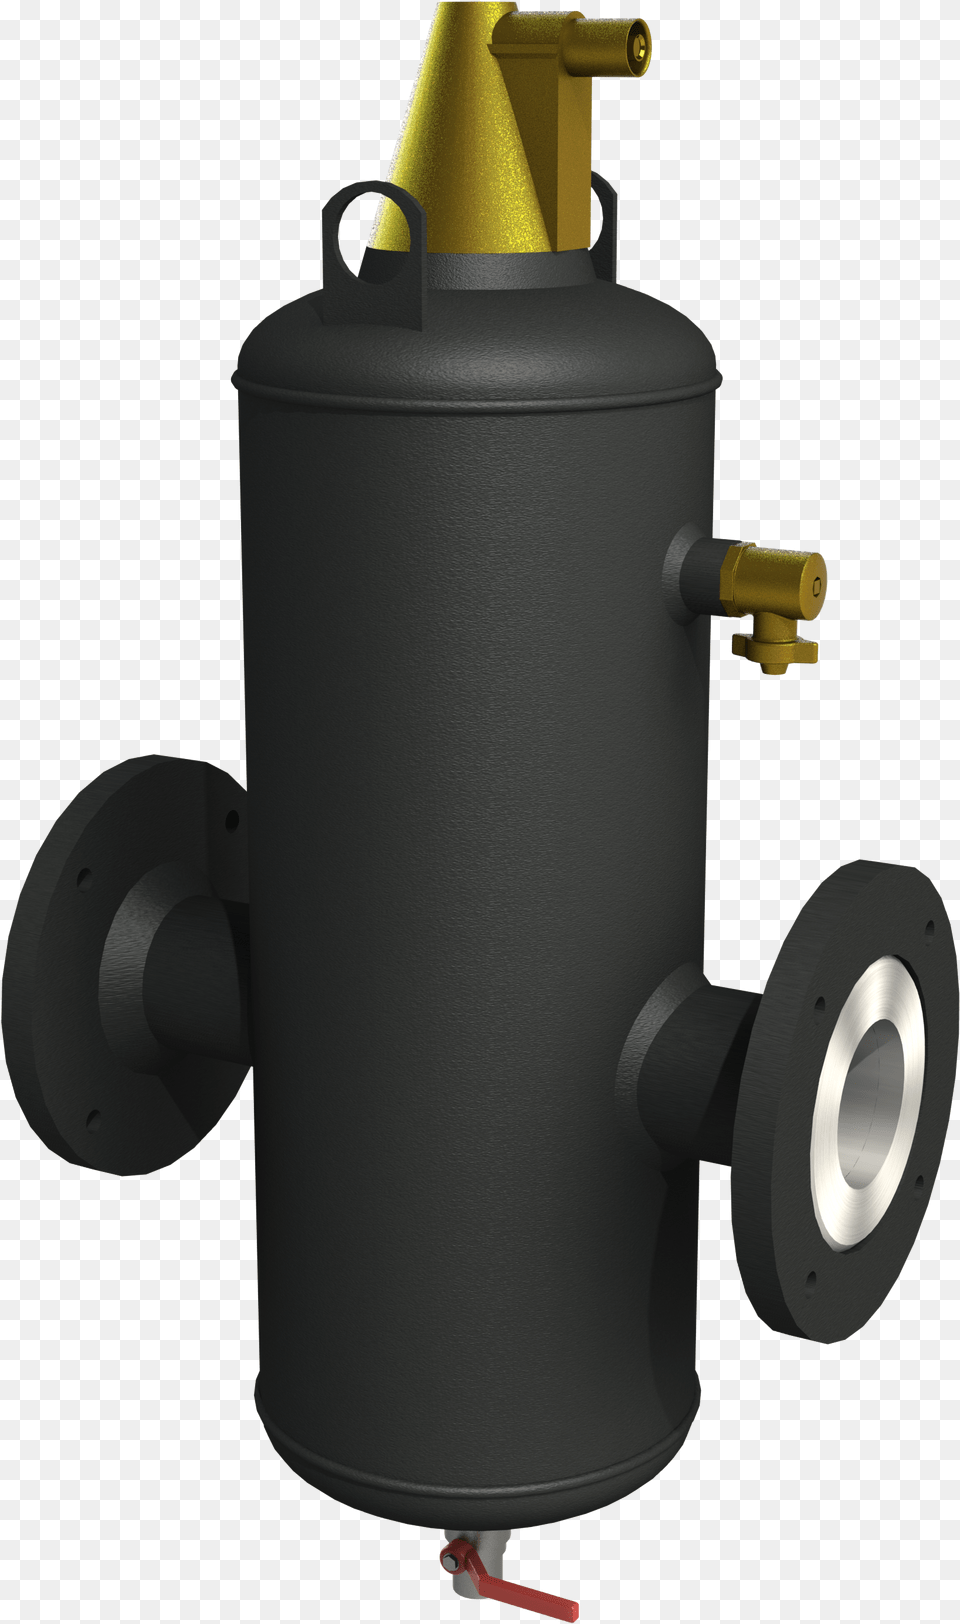 Available In Sizes From 50mm To 200mm Cylinder, Fire Hydrant, Hydrant Free Png Download